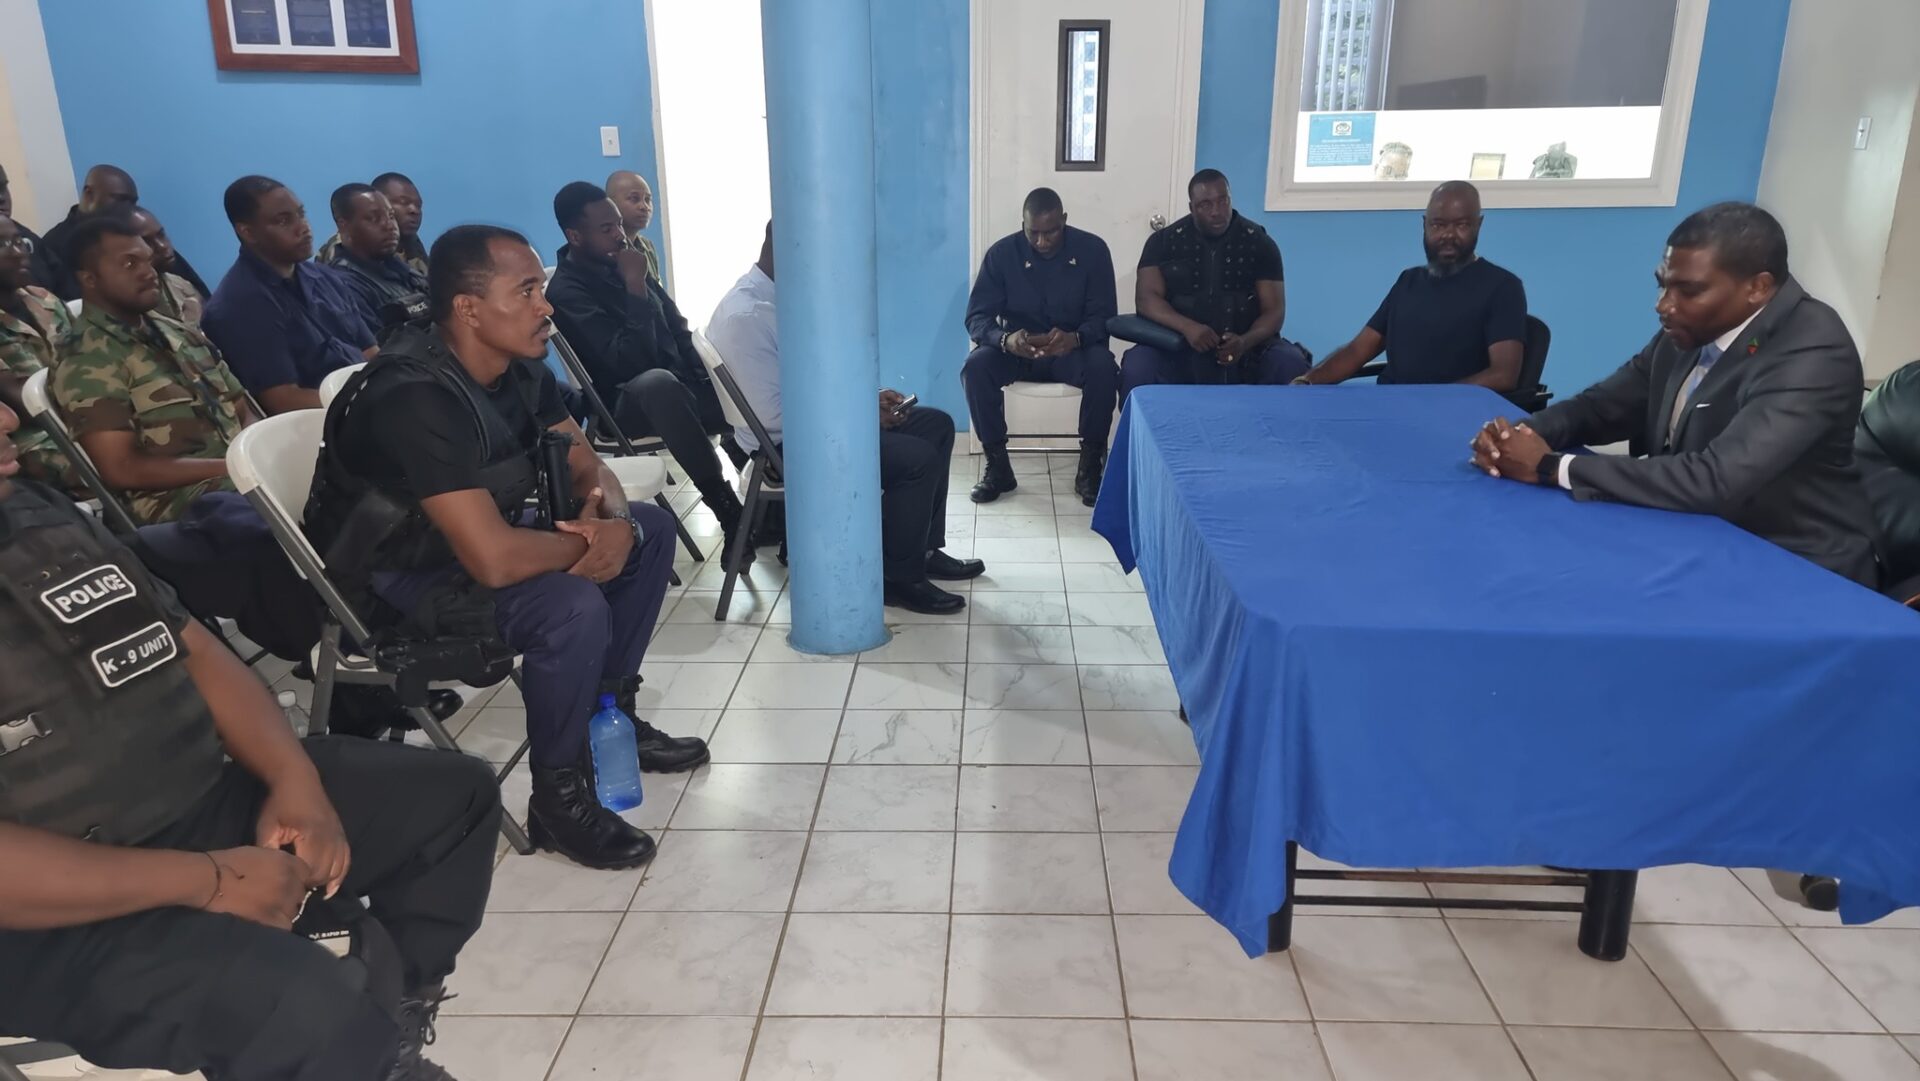 PM Drew visits Special Service Unit of Royal Christopher & Nevis Police Force (Image courtesy: Facebook)